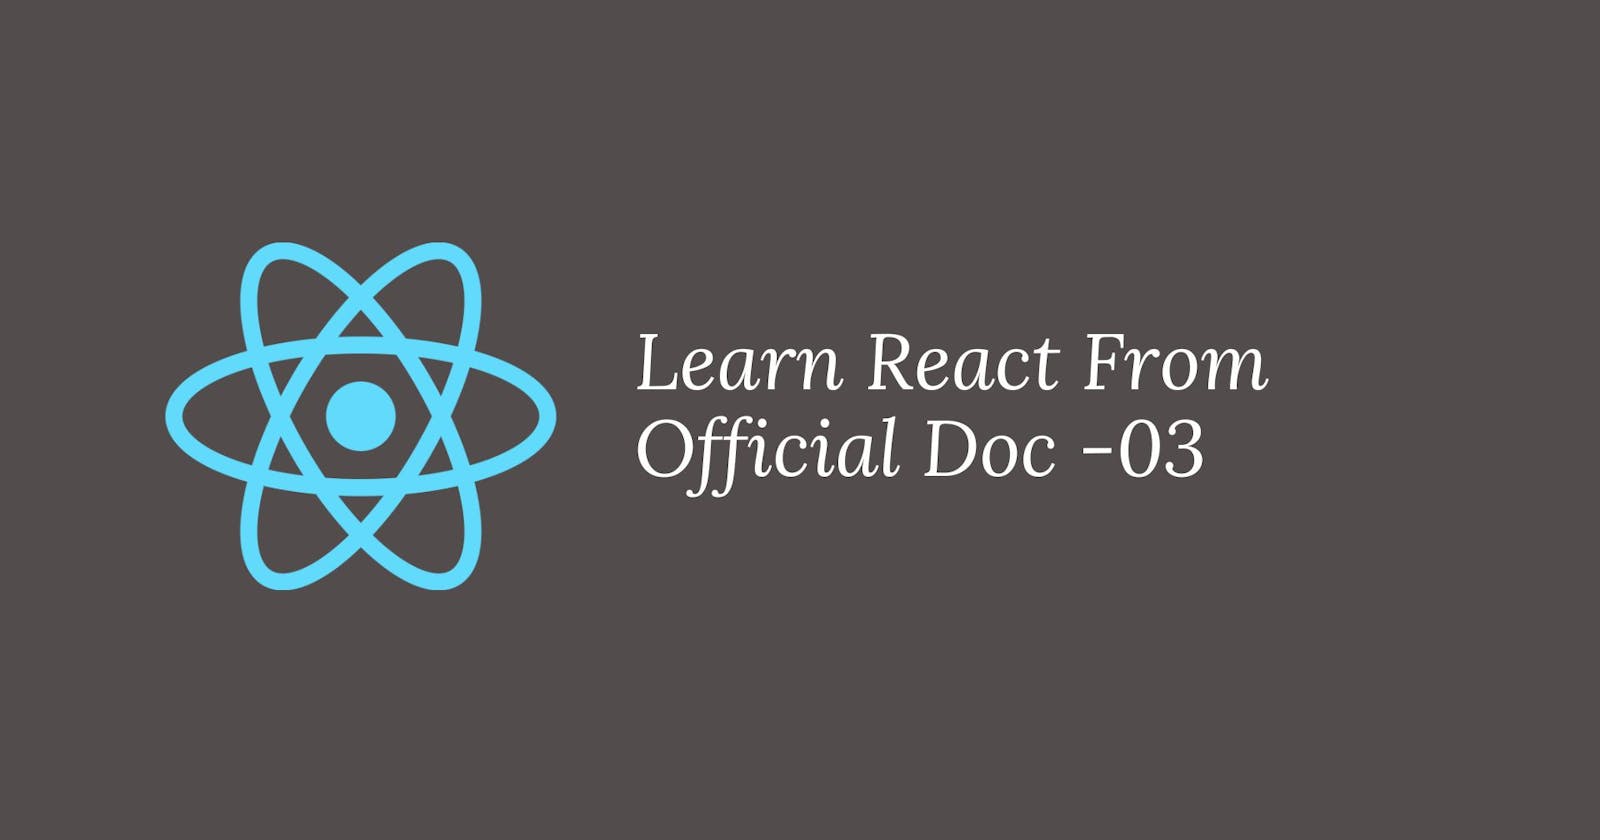 Learn React From Official Doc -03